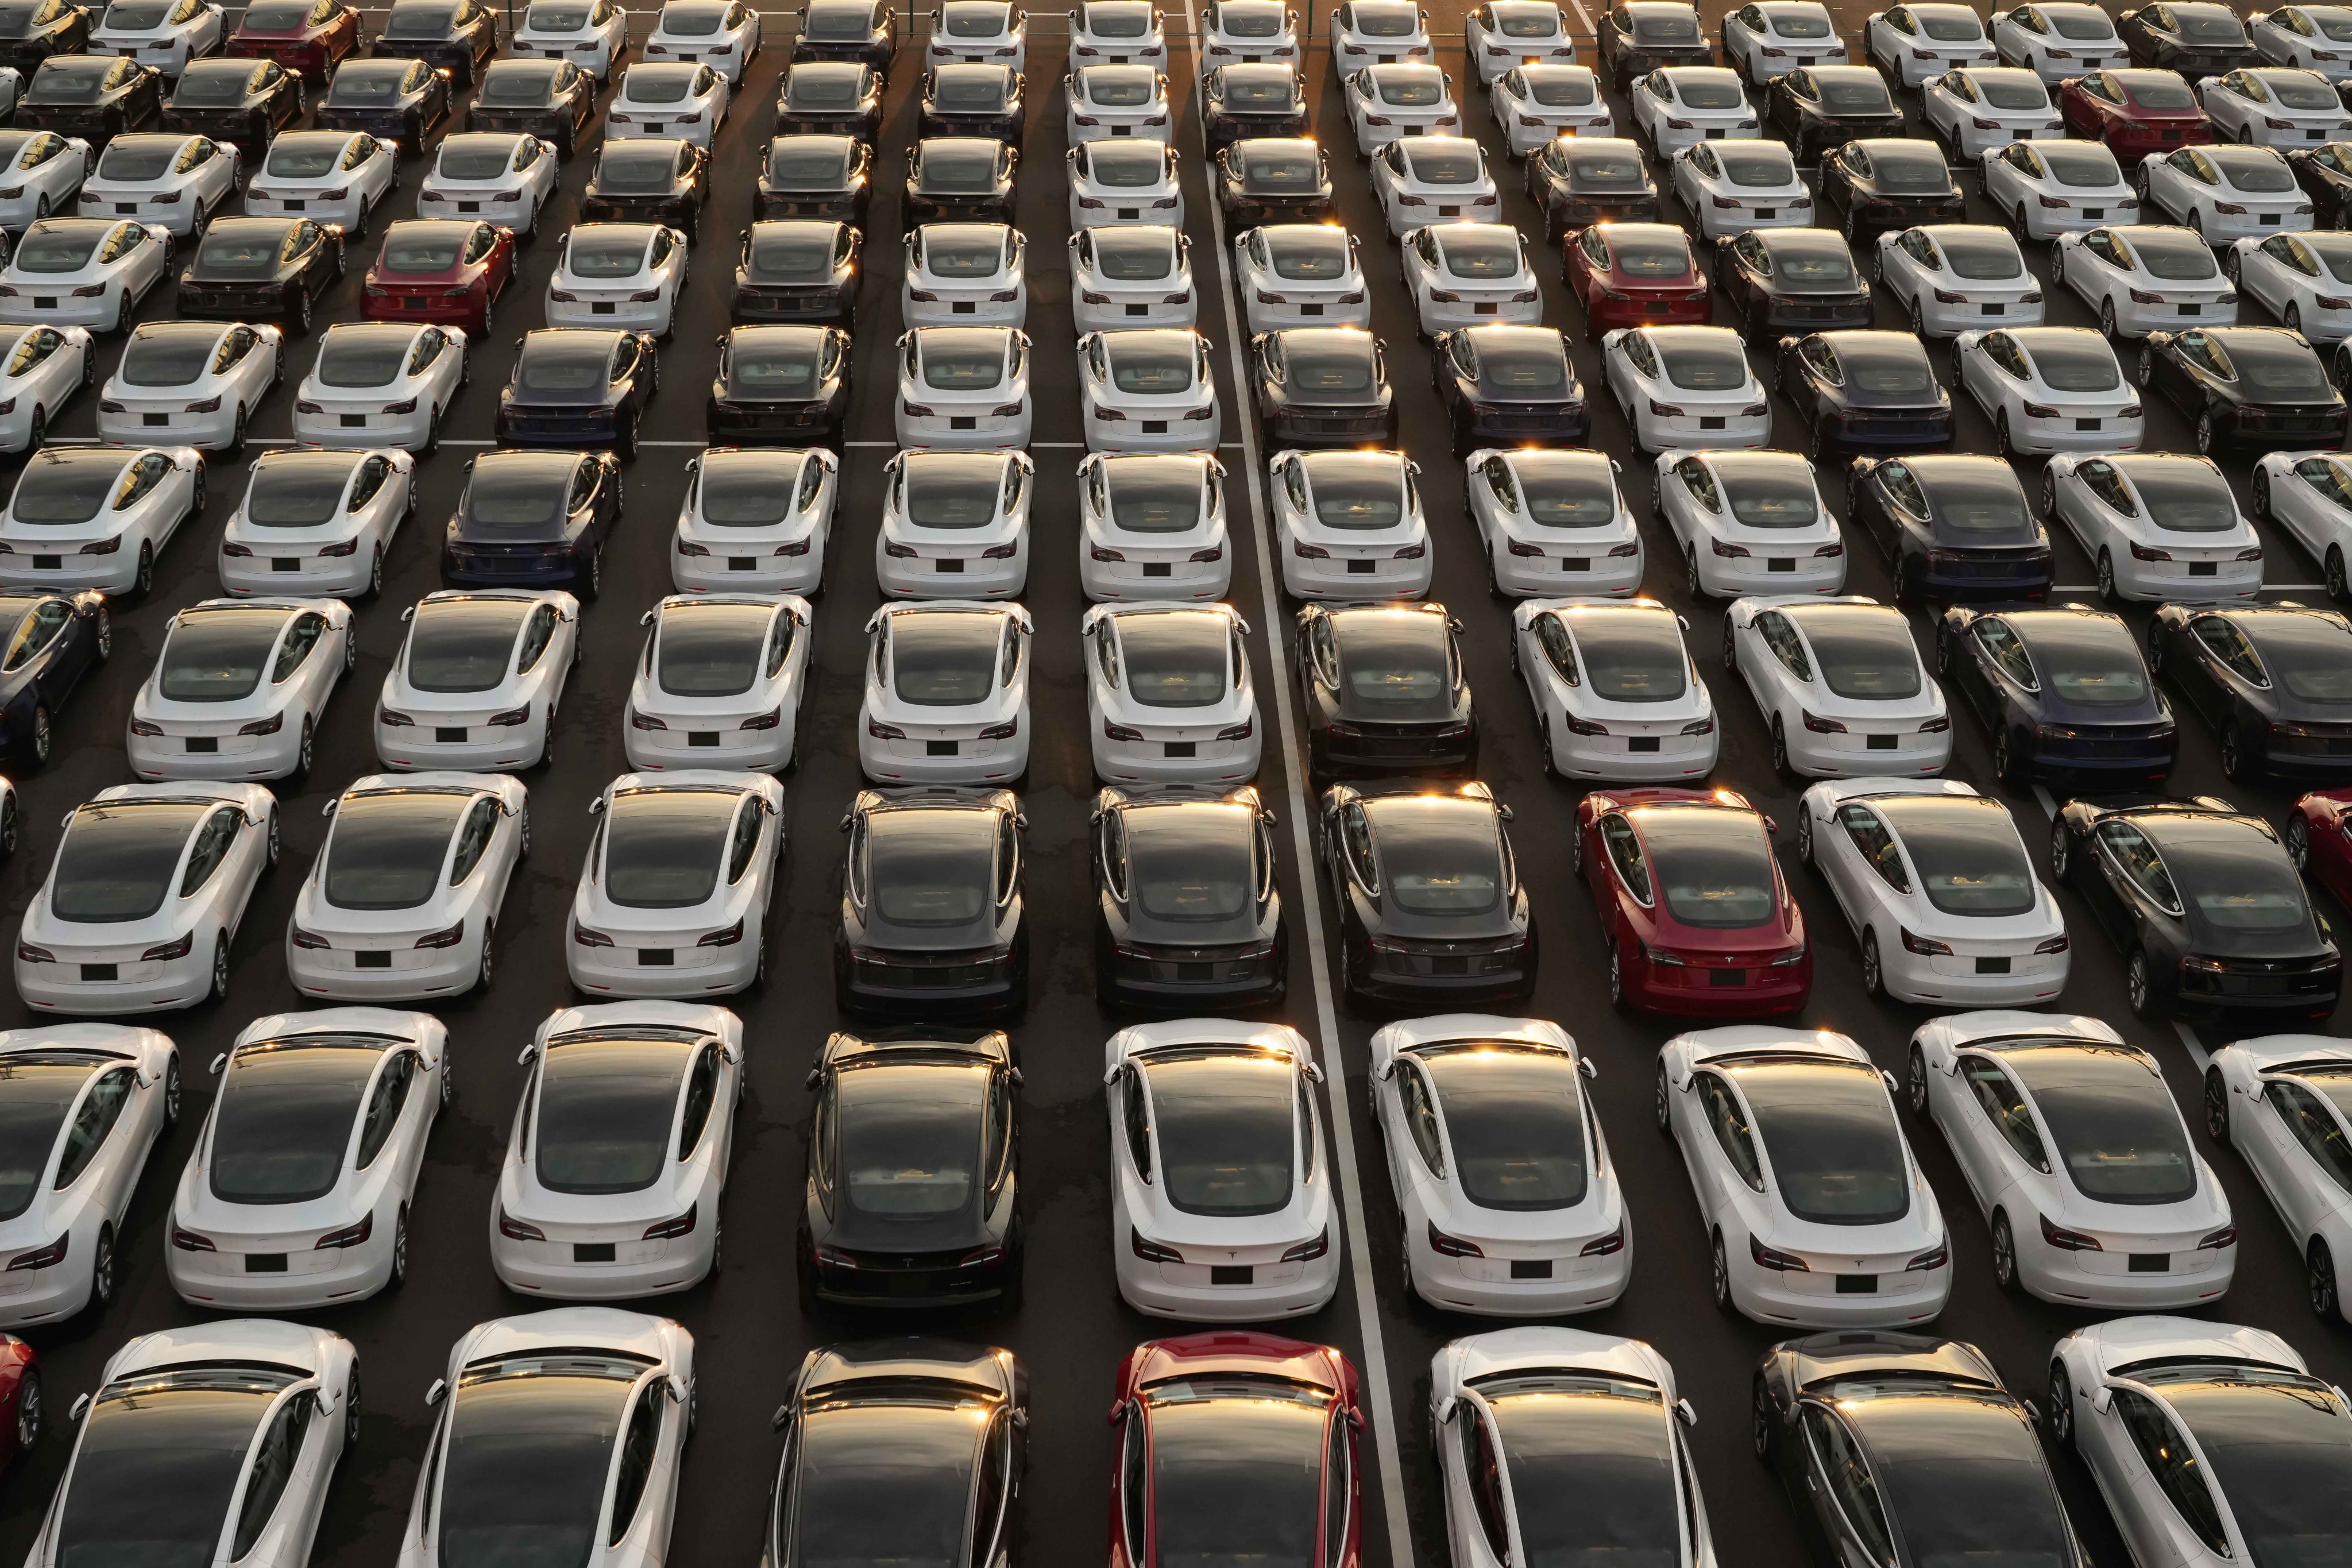 Tesla’s electric vehicles in a parking lot at Yokohama port in Japan on February 14, 2022. Photo: Bloomberg